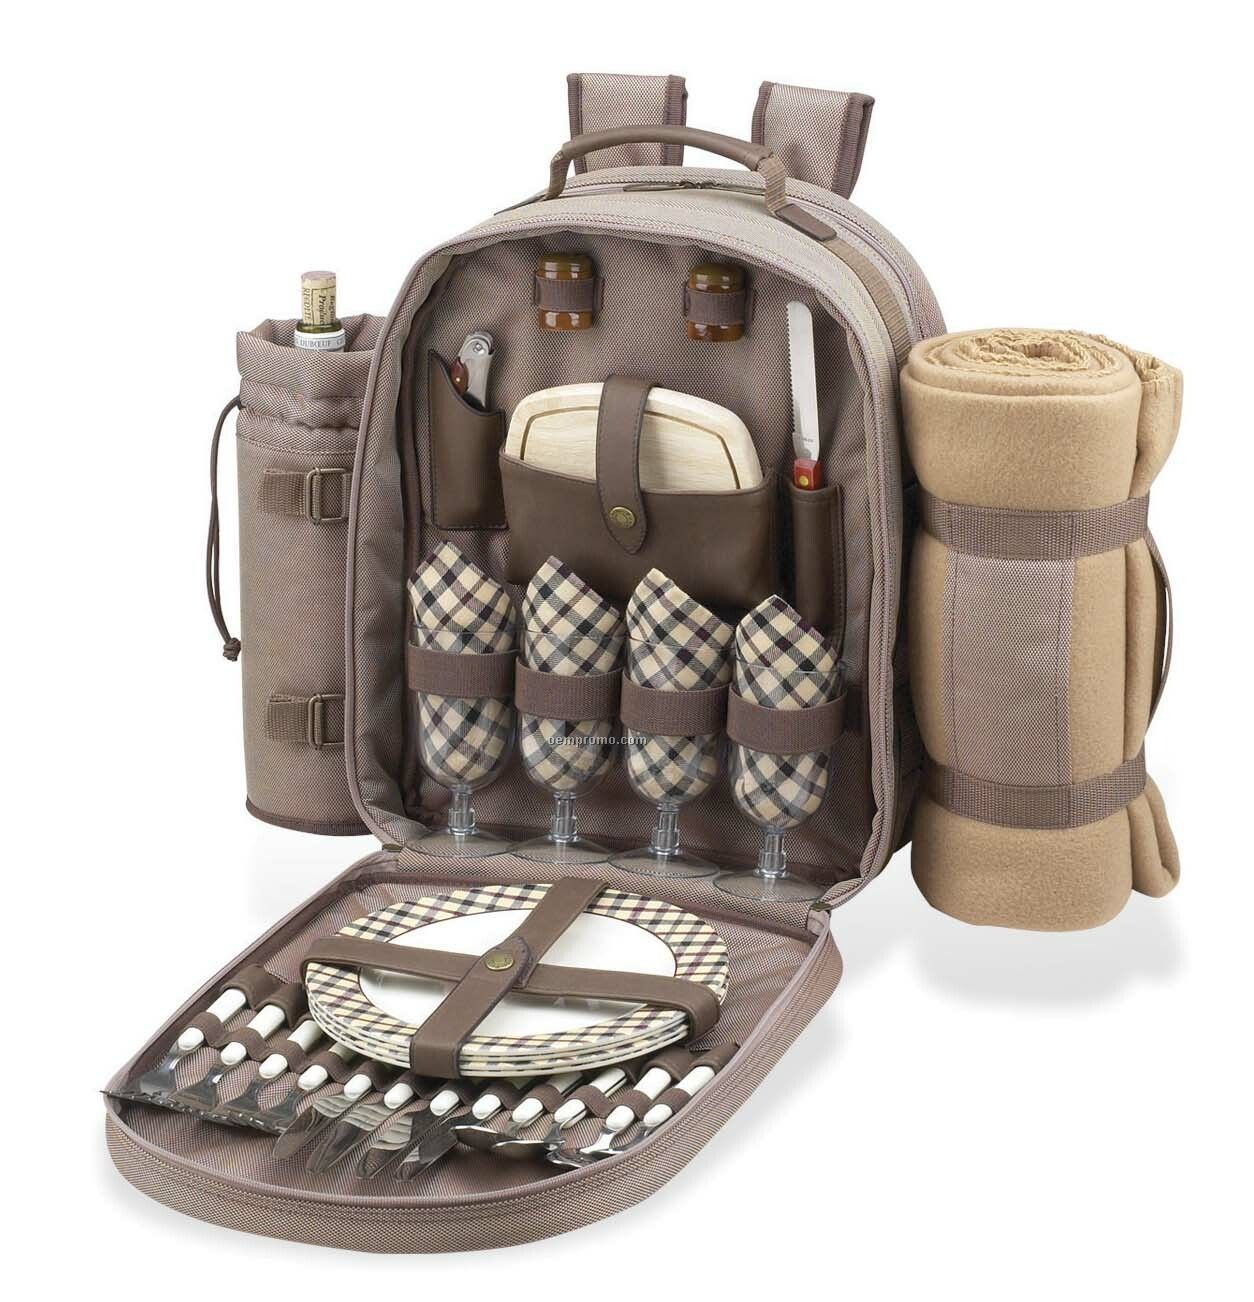 New Hudson Picnic Backpack With Blanket For Four